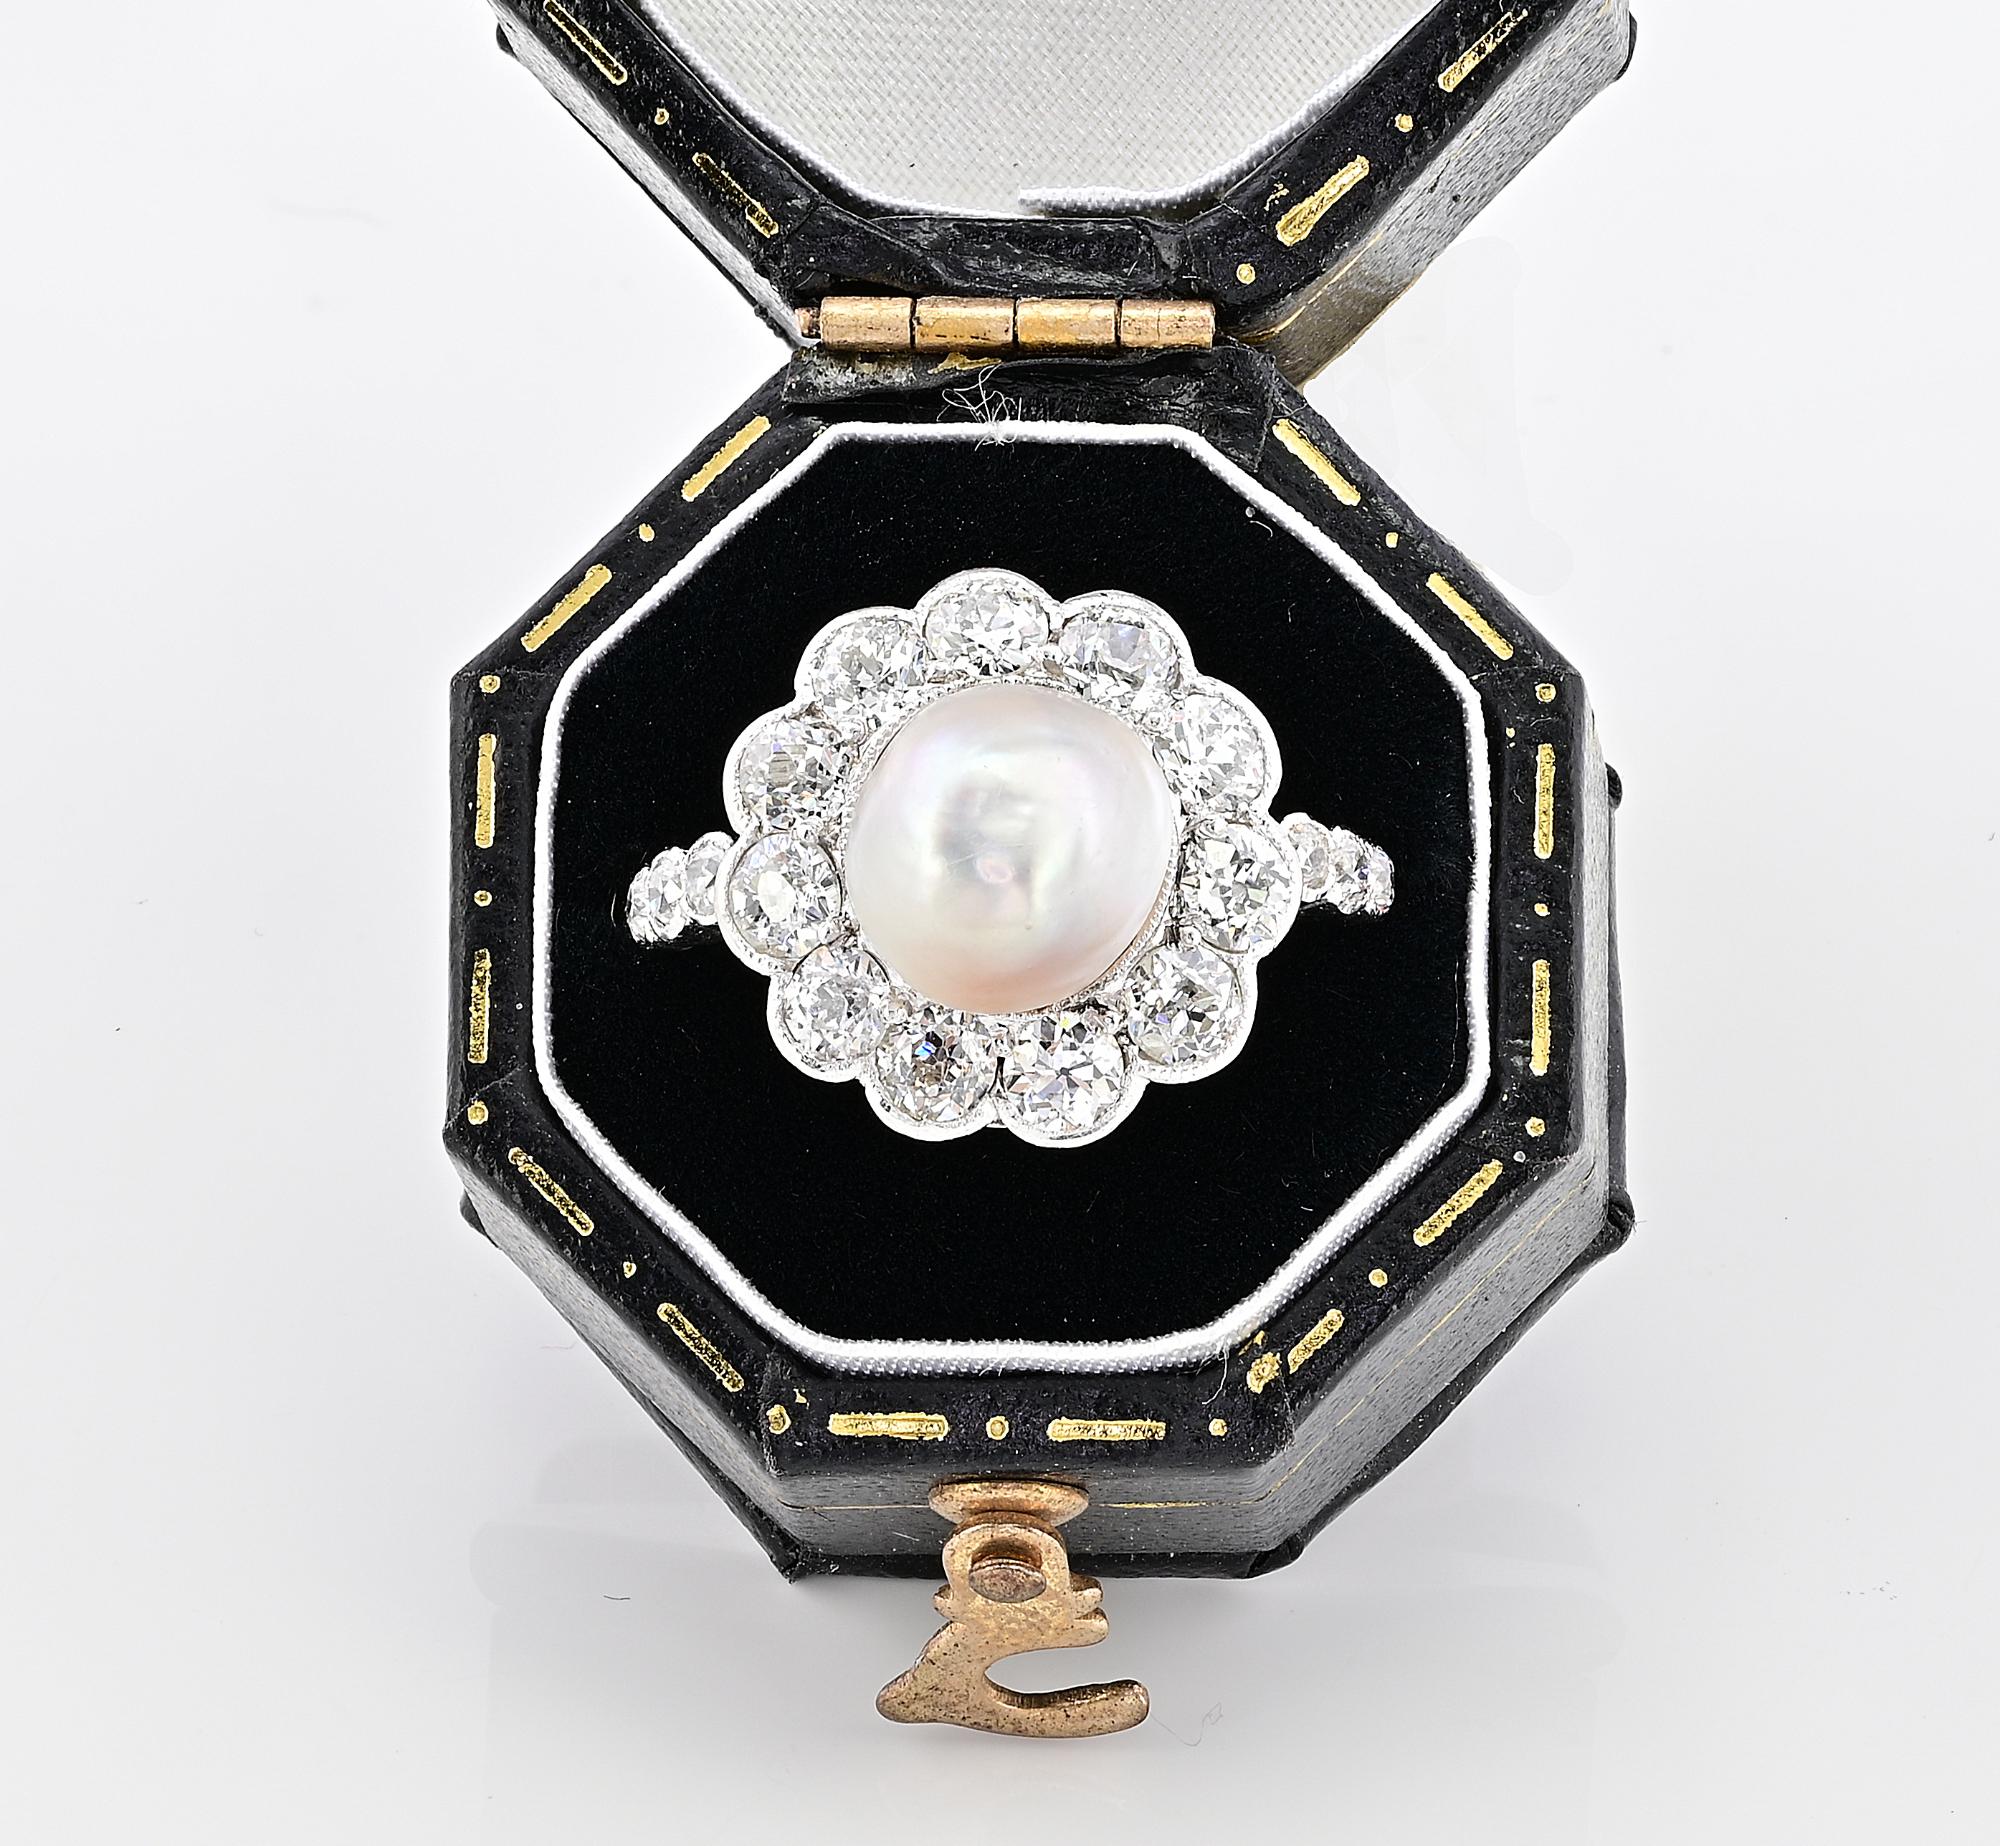 This fabulous antique Edwardian period Diamond & Pearl ring is the epitome of eternal elegance
Dated 1910 circa, hand crafted of solid 18 Kt gold platinum topped
Floret daisy shape in beautiful combination of silky Pearl sheen and white Diamond